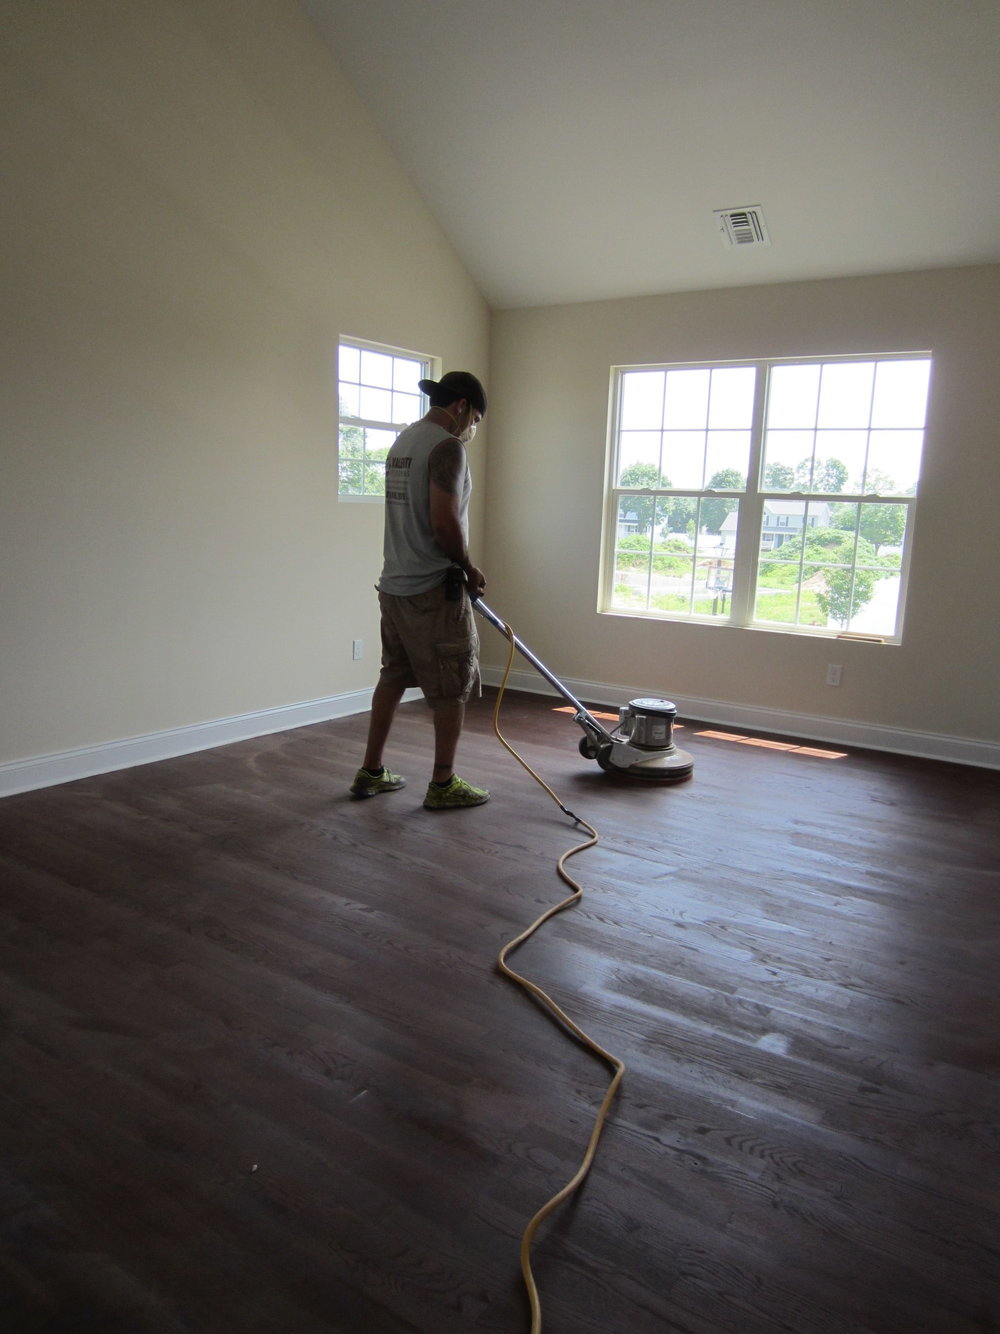 What Is A Screen And Re Coat Aka, Best Hardwood Floor Buffing Machine